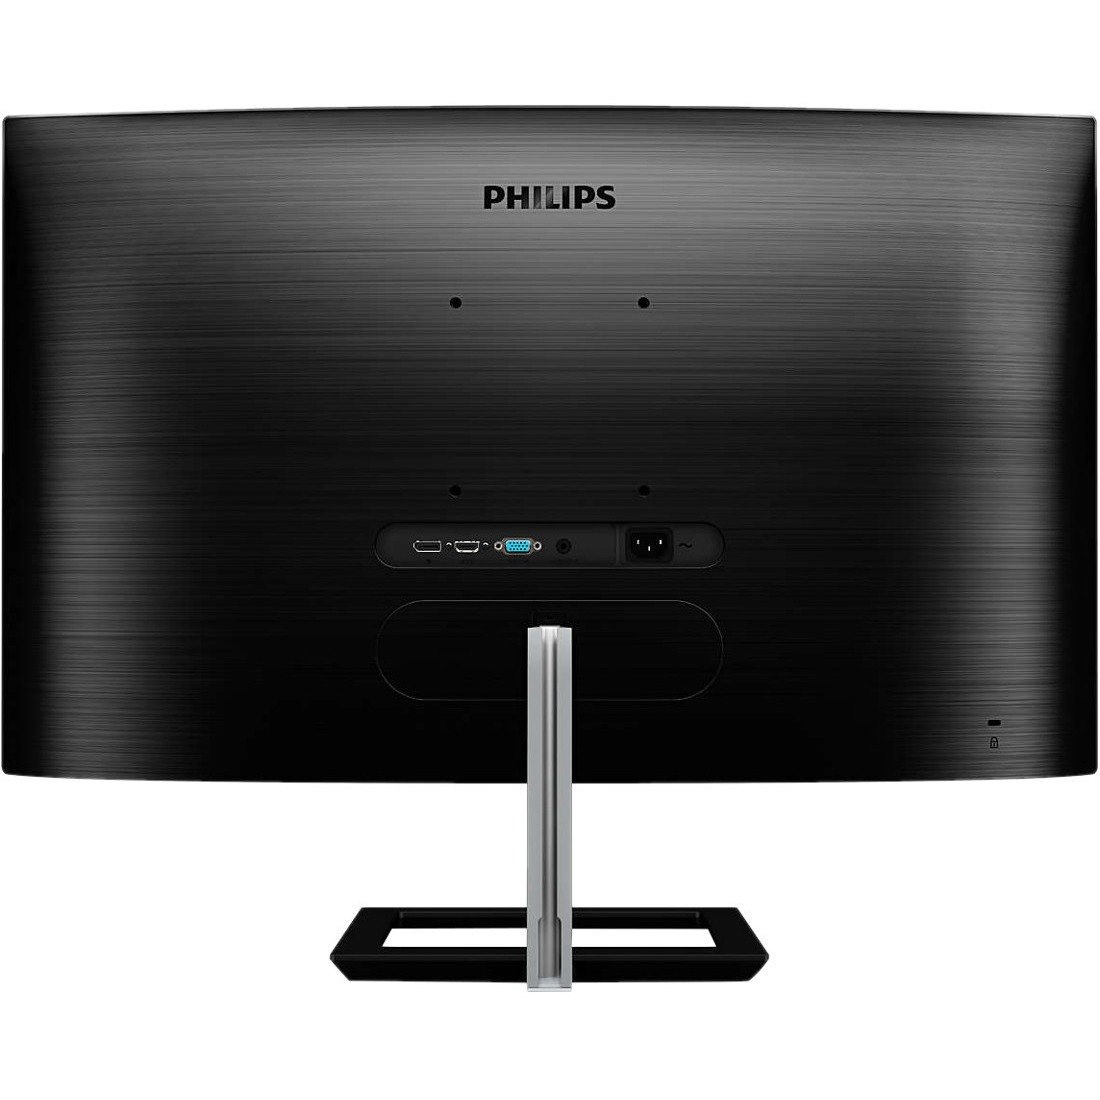 Philips 322E1C 32" Class Full HD Curved Screen LCD Monitor - 16:9 - Textured Black